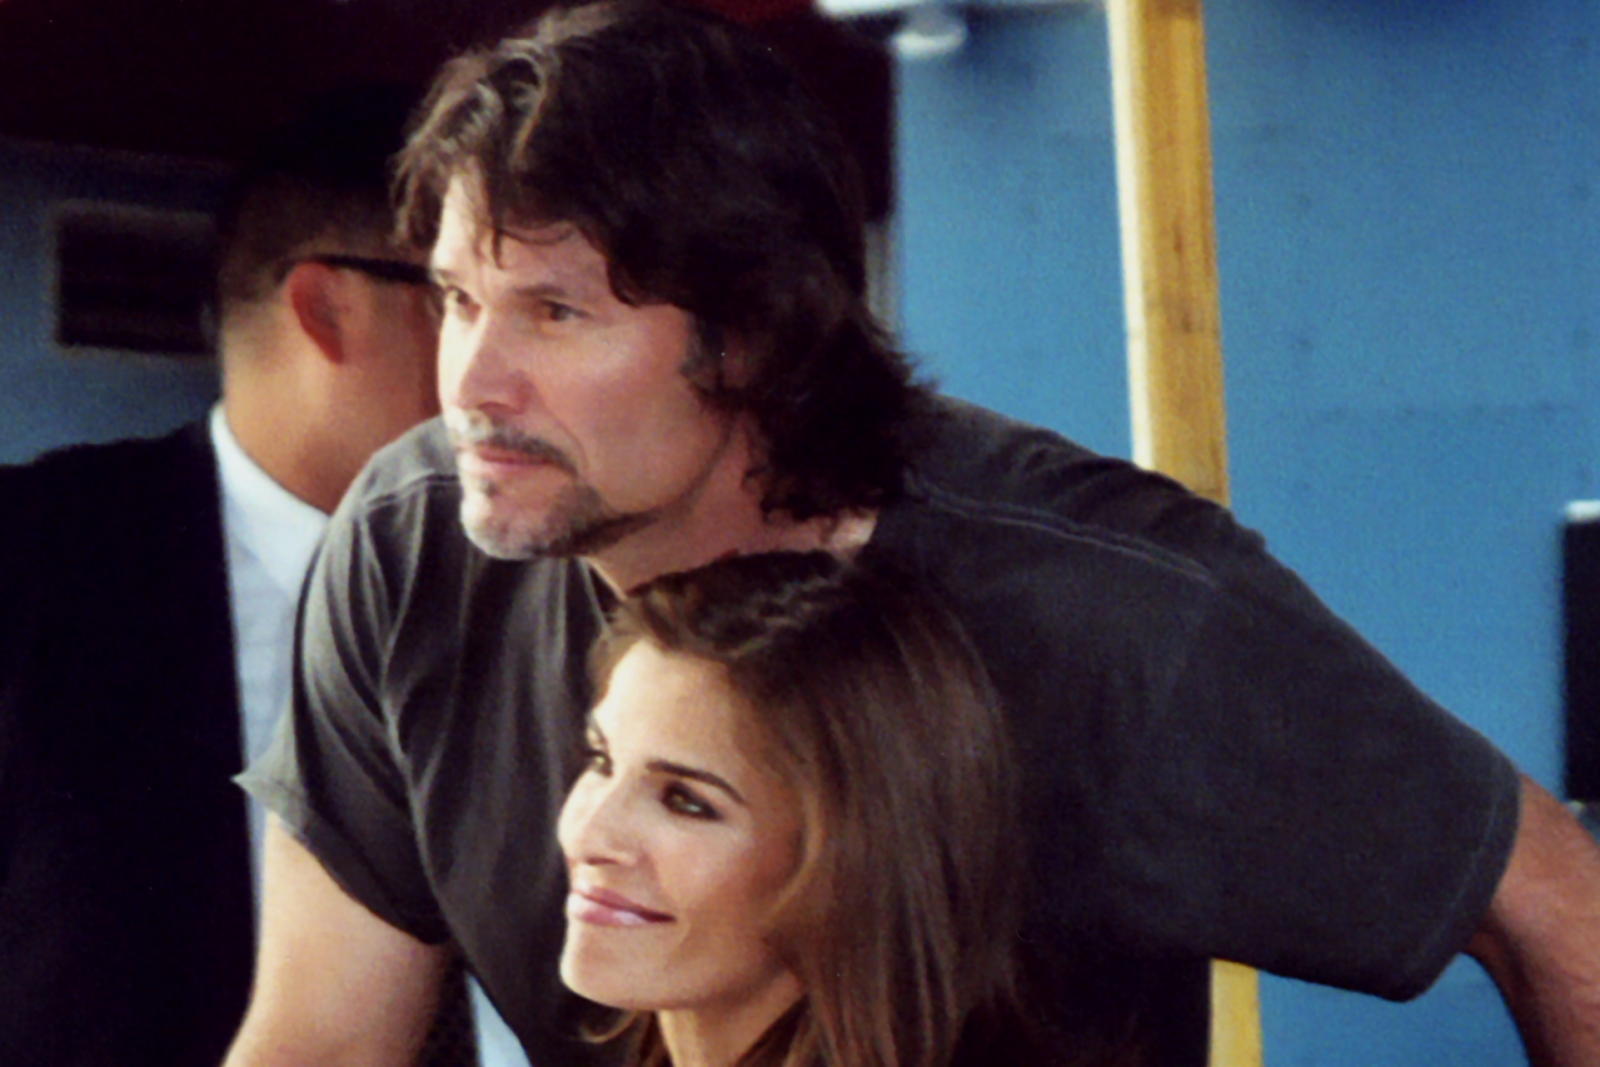 Peter Reckell and Kristian Alfonso at Fan Fest 04. Image uploaded on December 21, 2006 | Photos: Wikipedia/Jennifer/Peter Reckell and Kristian Alfonso/CC BY-SA 3.0